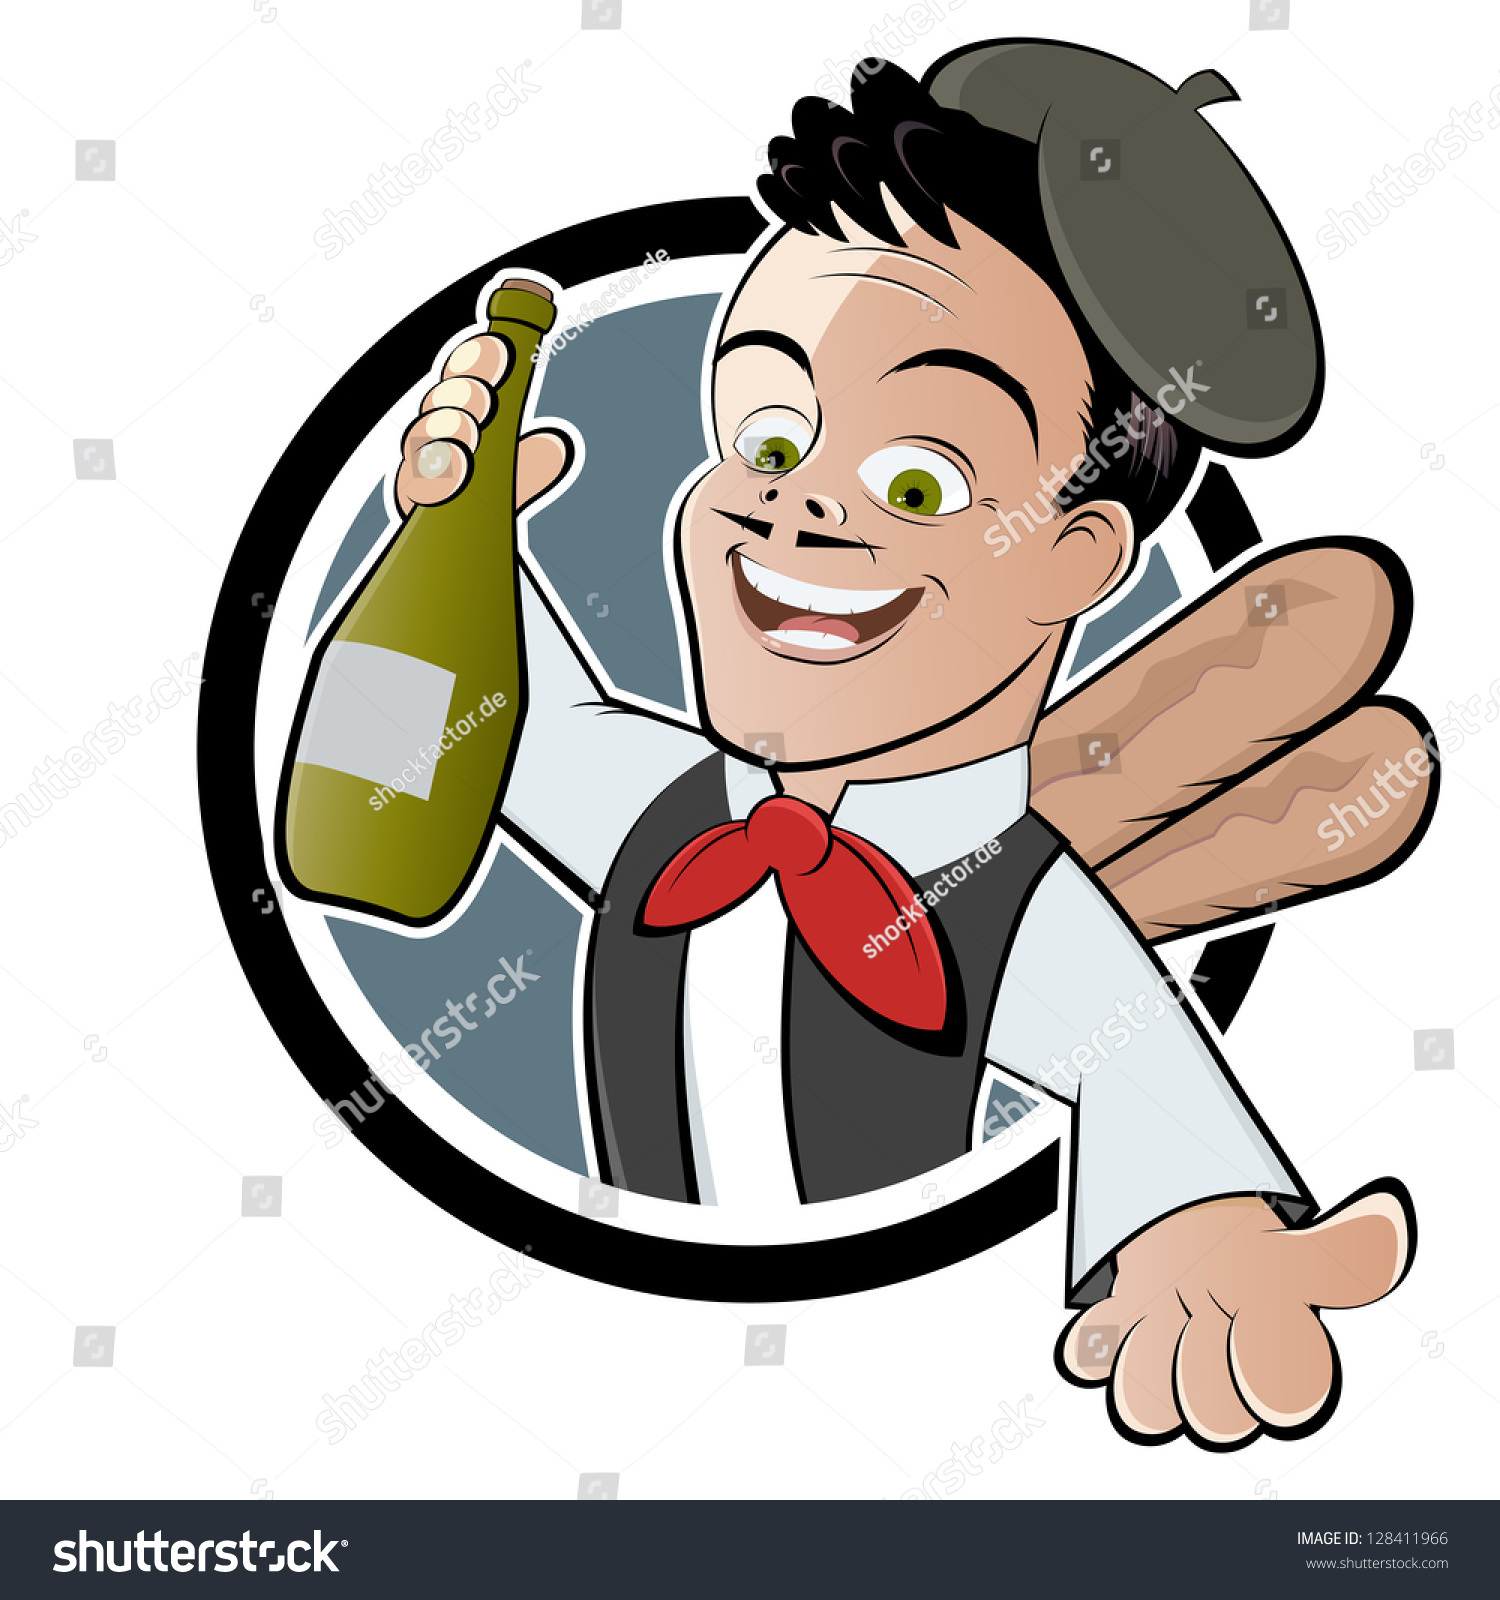 french man clipart - photo #21